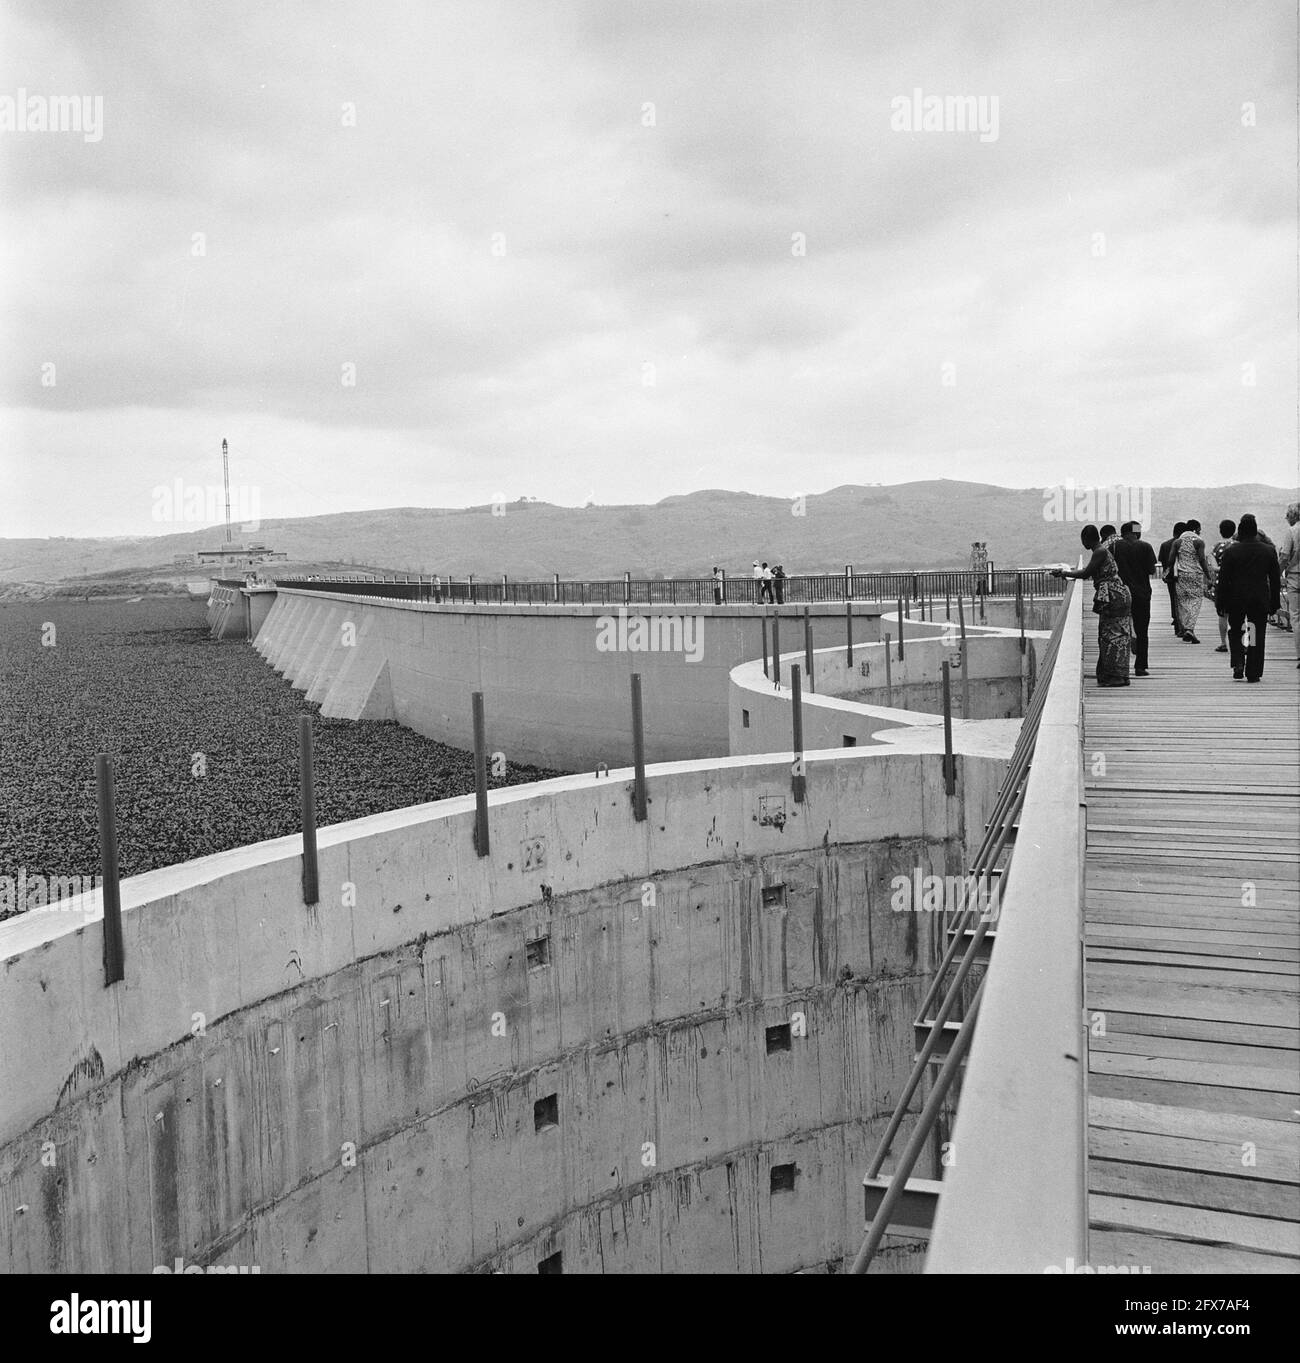 Inga project, dam in Zaire River, October 24, 1973, landscapes, rivers, dams, The Netherlands, 20th century press agency photo, news to remember, documentary, historic photography 1945-1990, visual stories, human history of the Twentieth Century, capturing moments in time Stock Photo